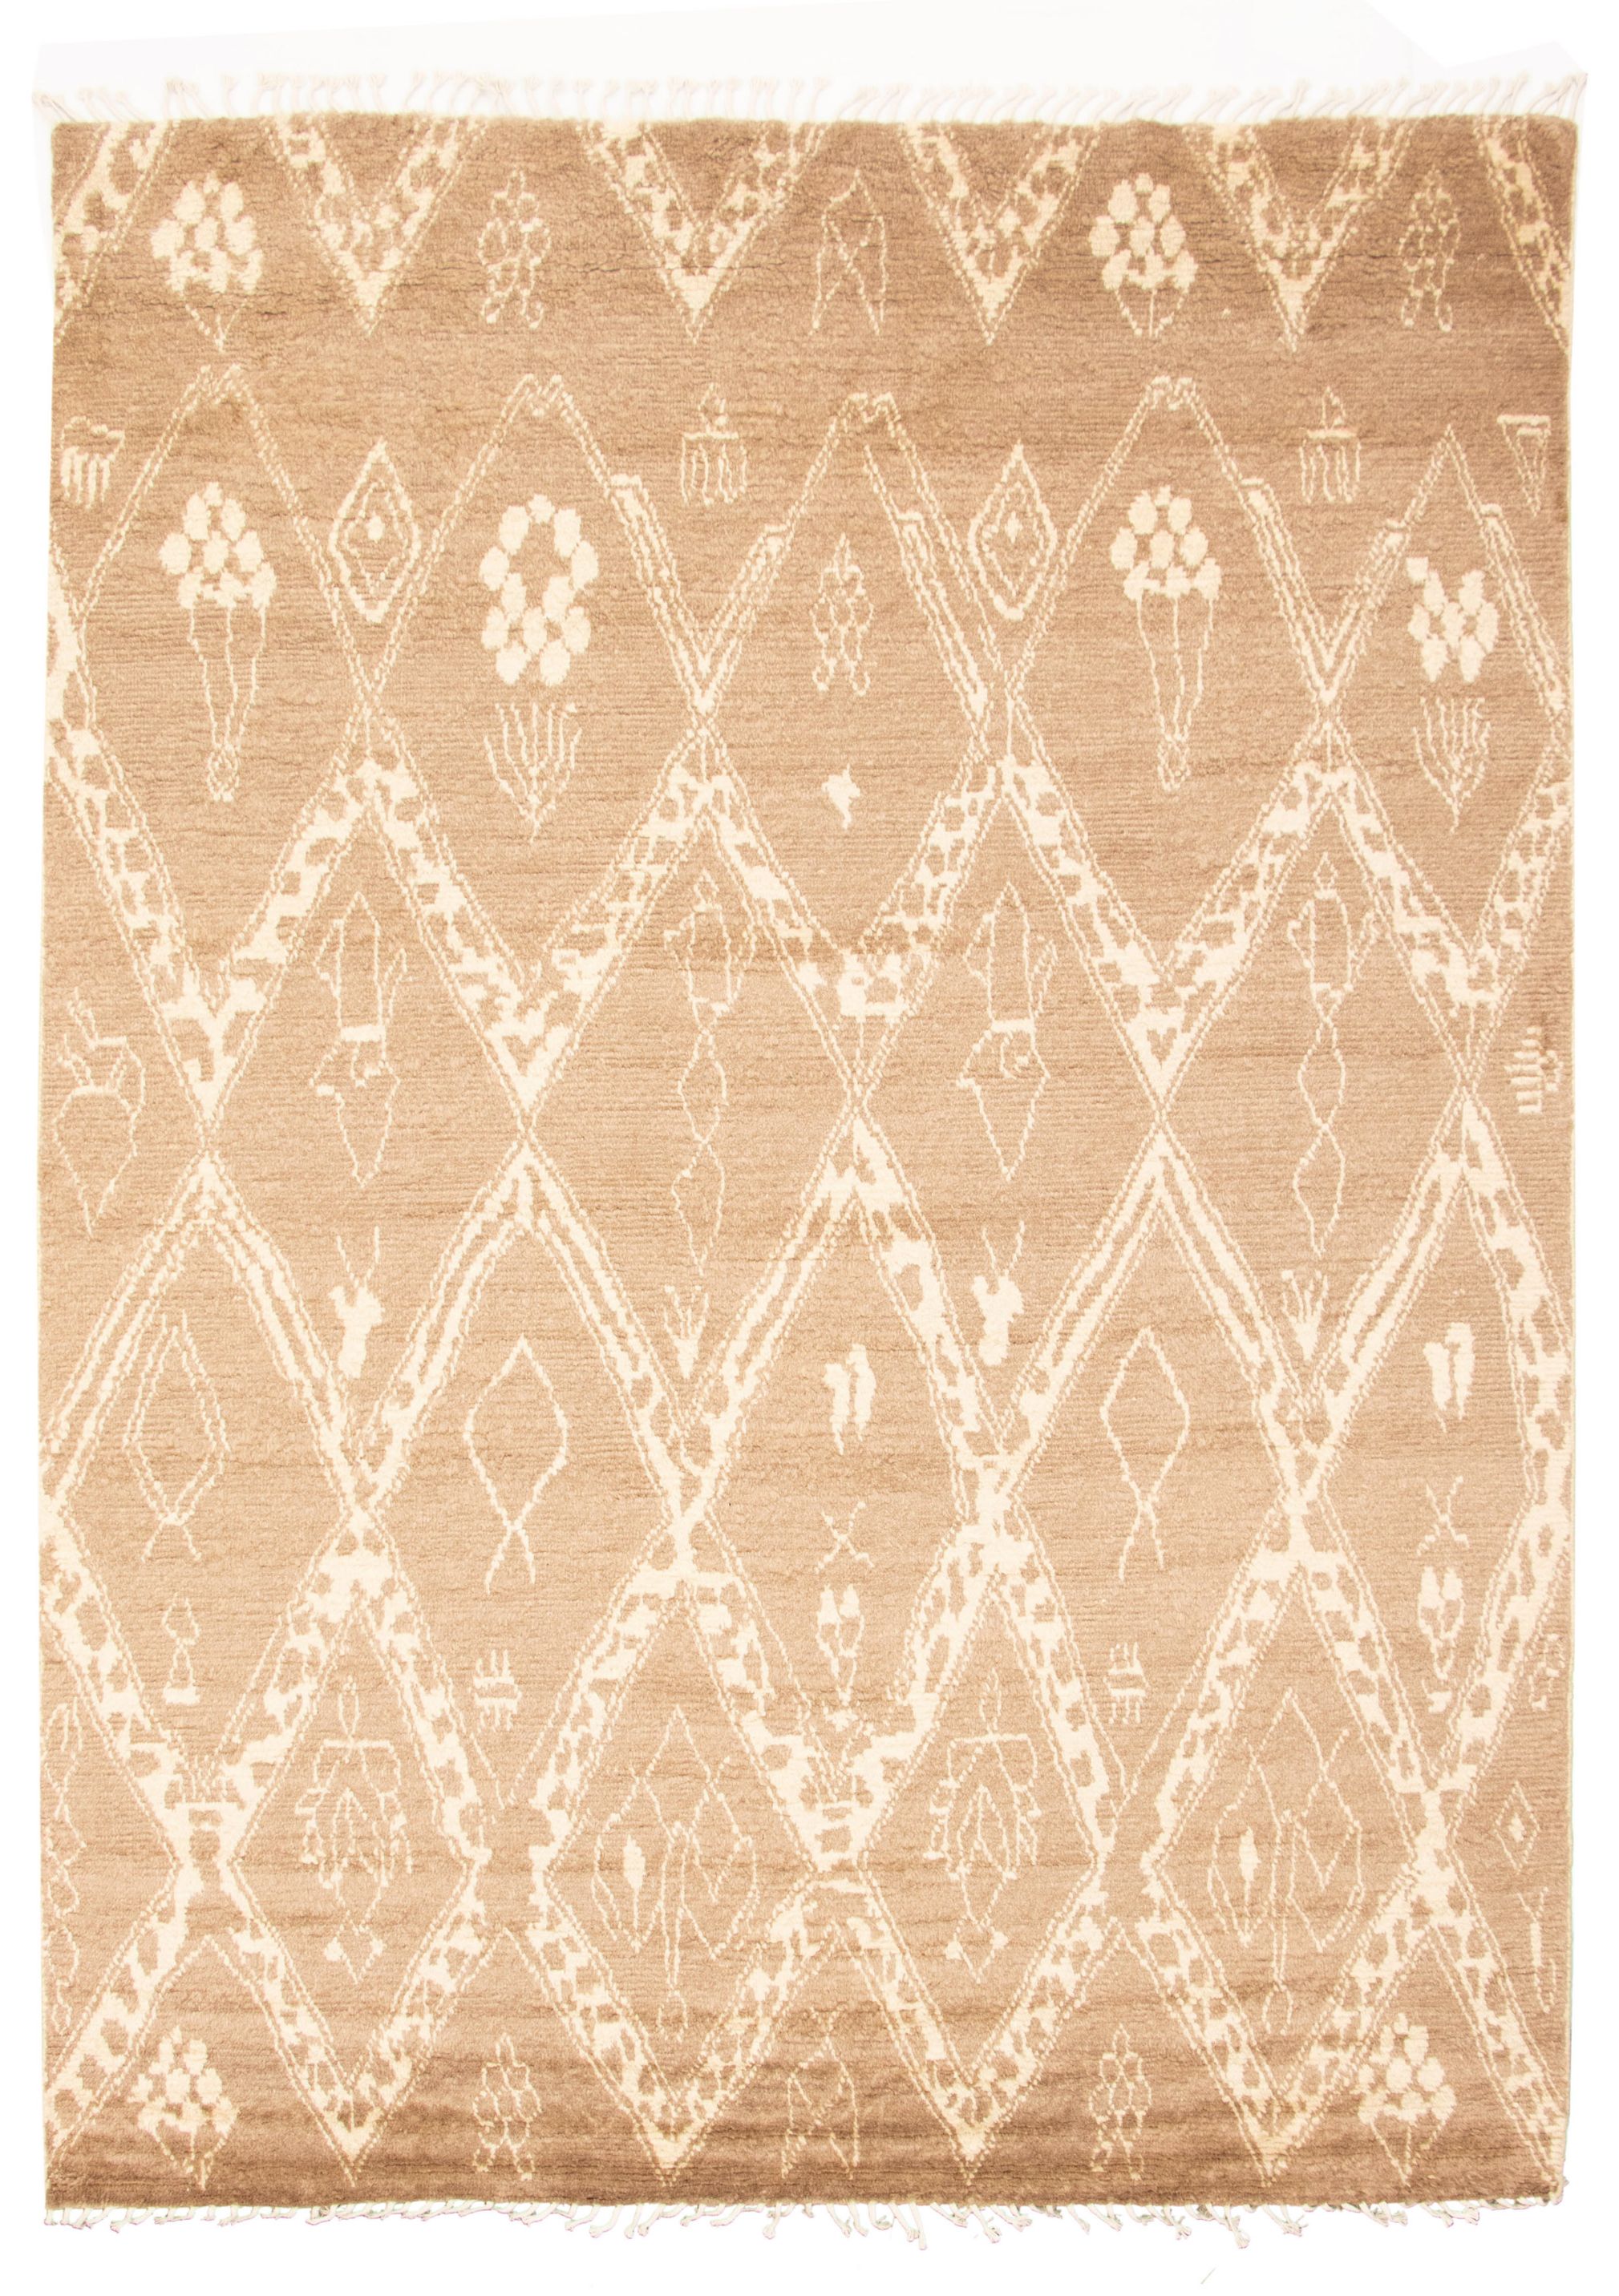 Hand-knotted Marrakech Brown Wool Rug 9'0" x 12'1" Size: 9'0" x 12'1"  